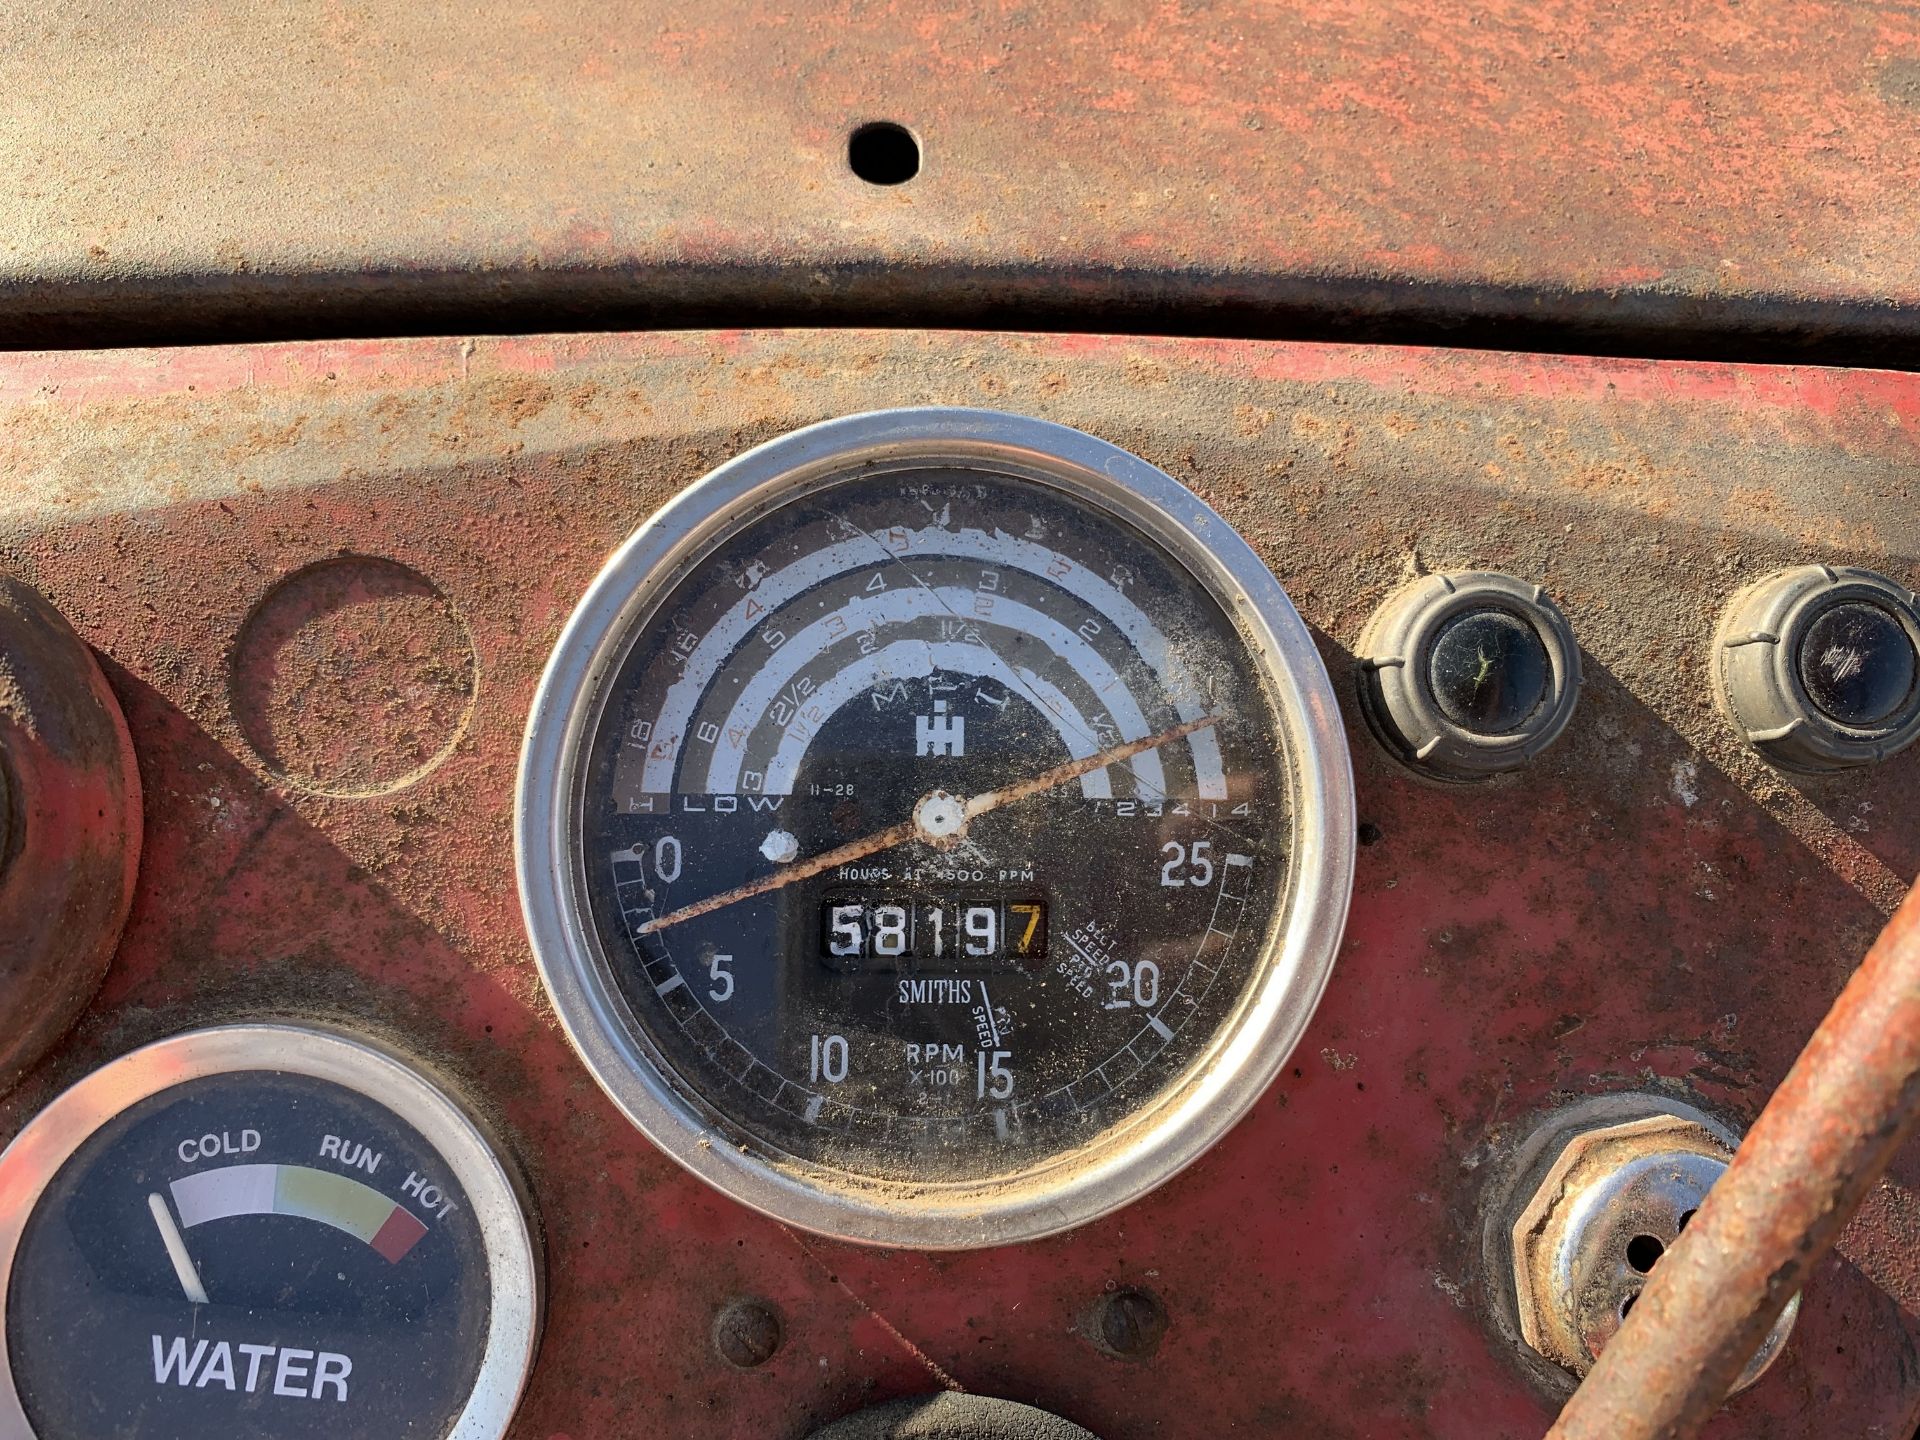 1966 McCormick 434 tractor, HJR 327D, 5819hrs indicated, diesel - Image 2 of 6